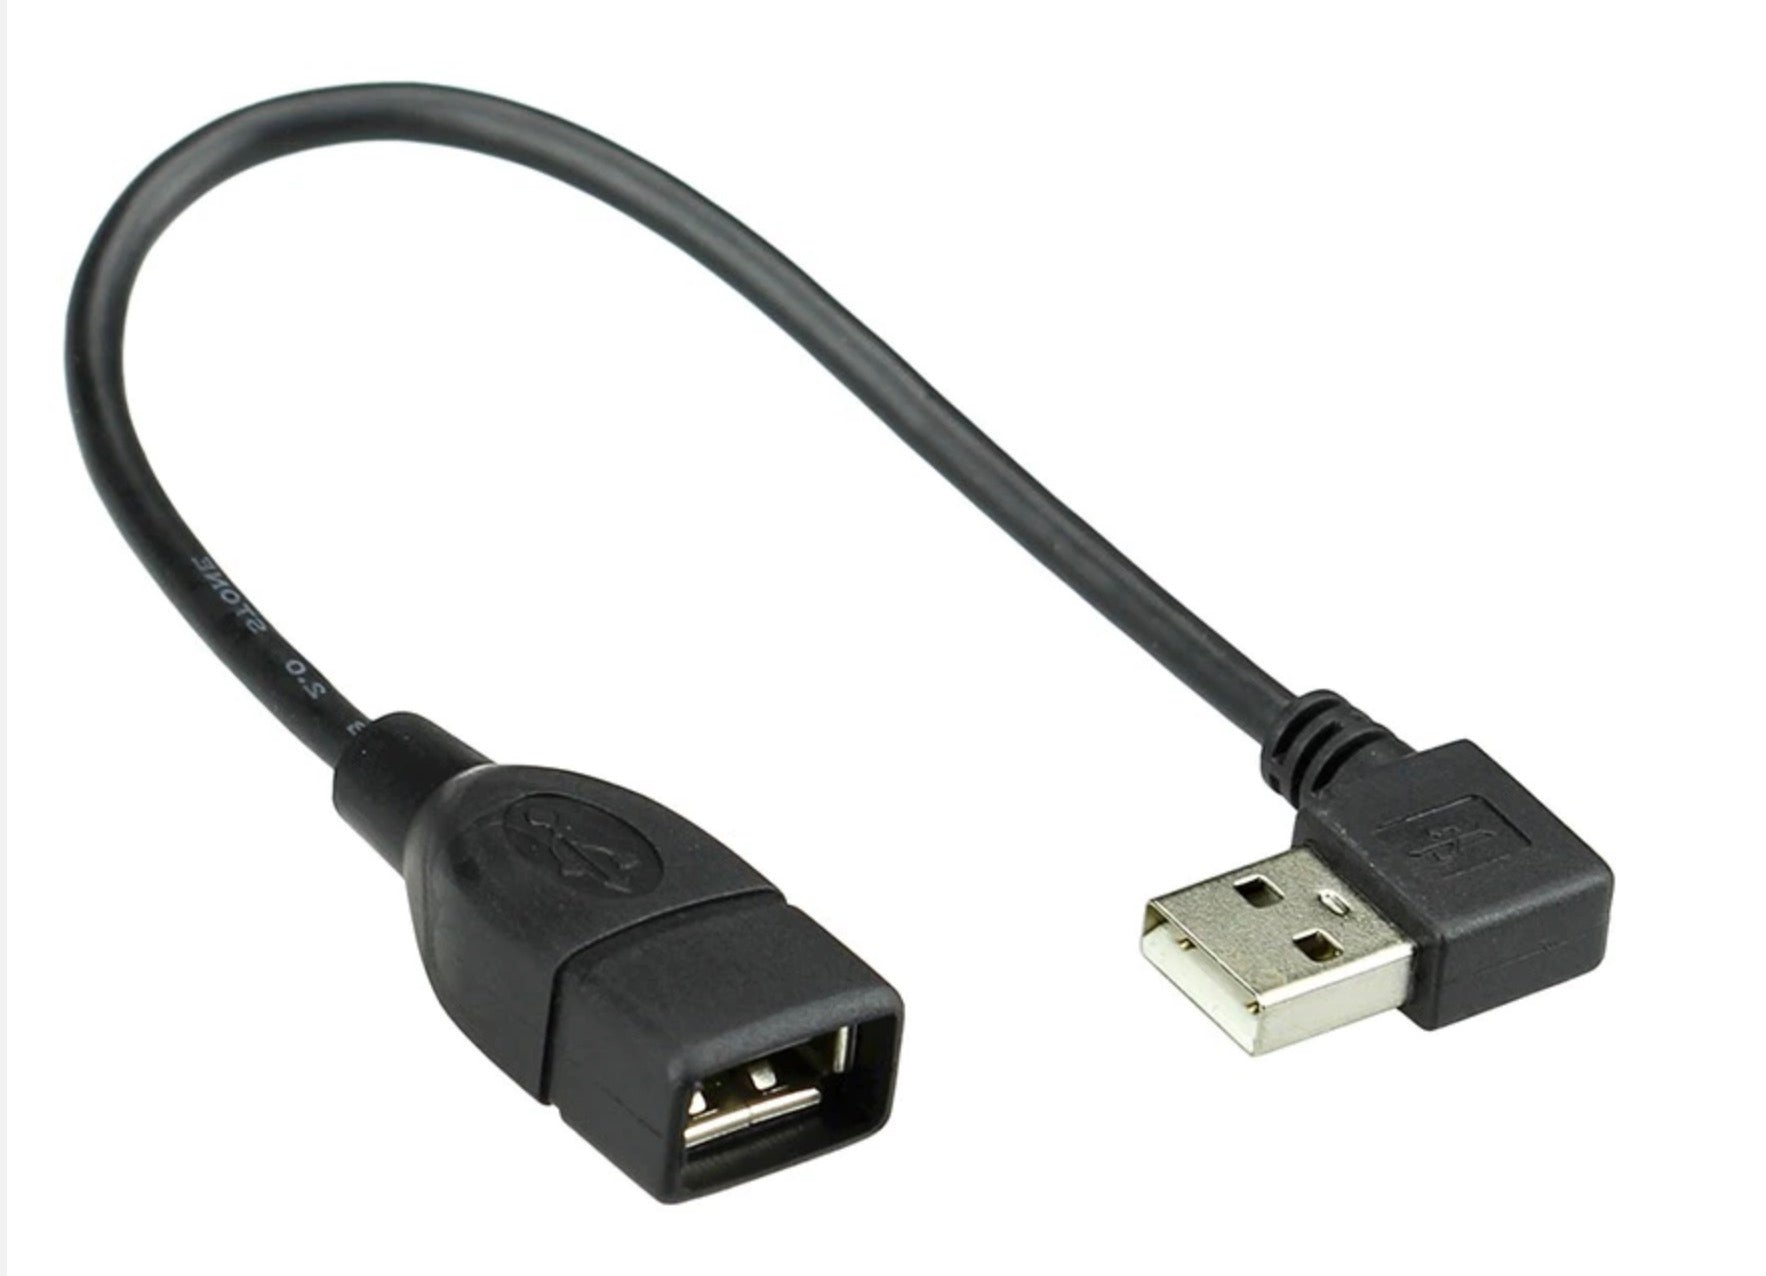 USB 2.0 Type A Male to Female Angled Extension Cable 0.3m